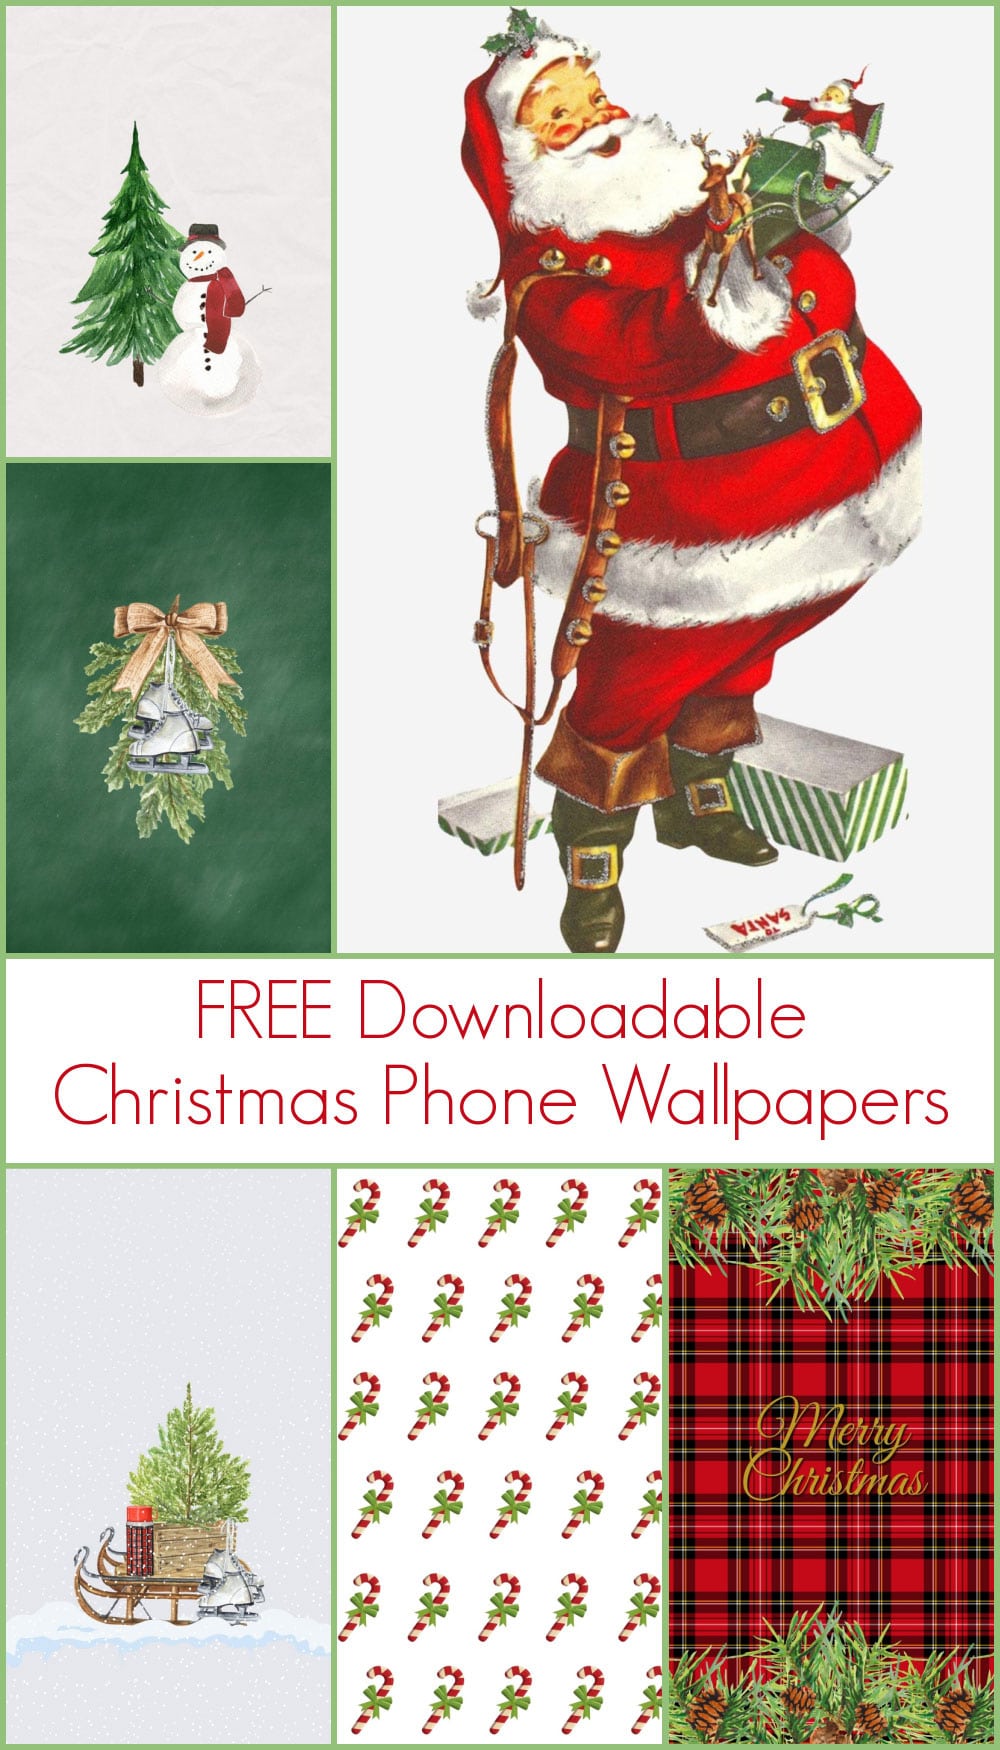 Add some Christmas cheer to your phone with these cute vintage-inspired Christmas phone wallpapers that you can easily add to your iPhone, Android, and Windows phone.